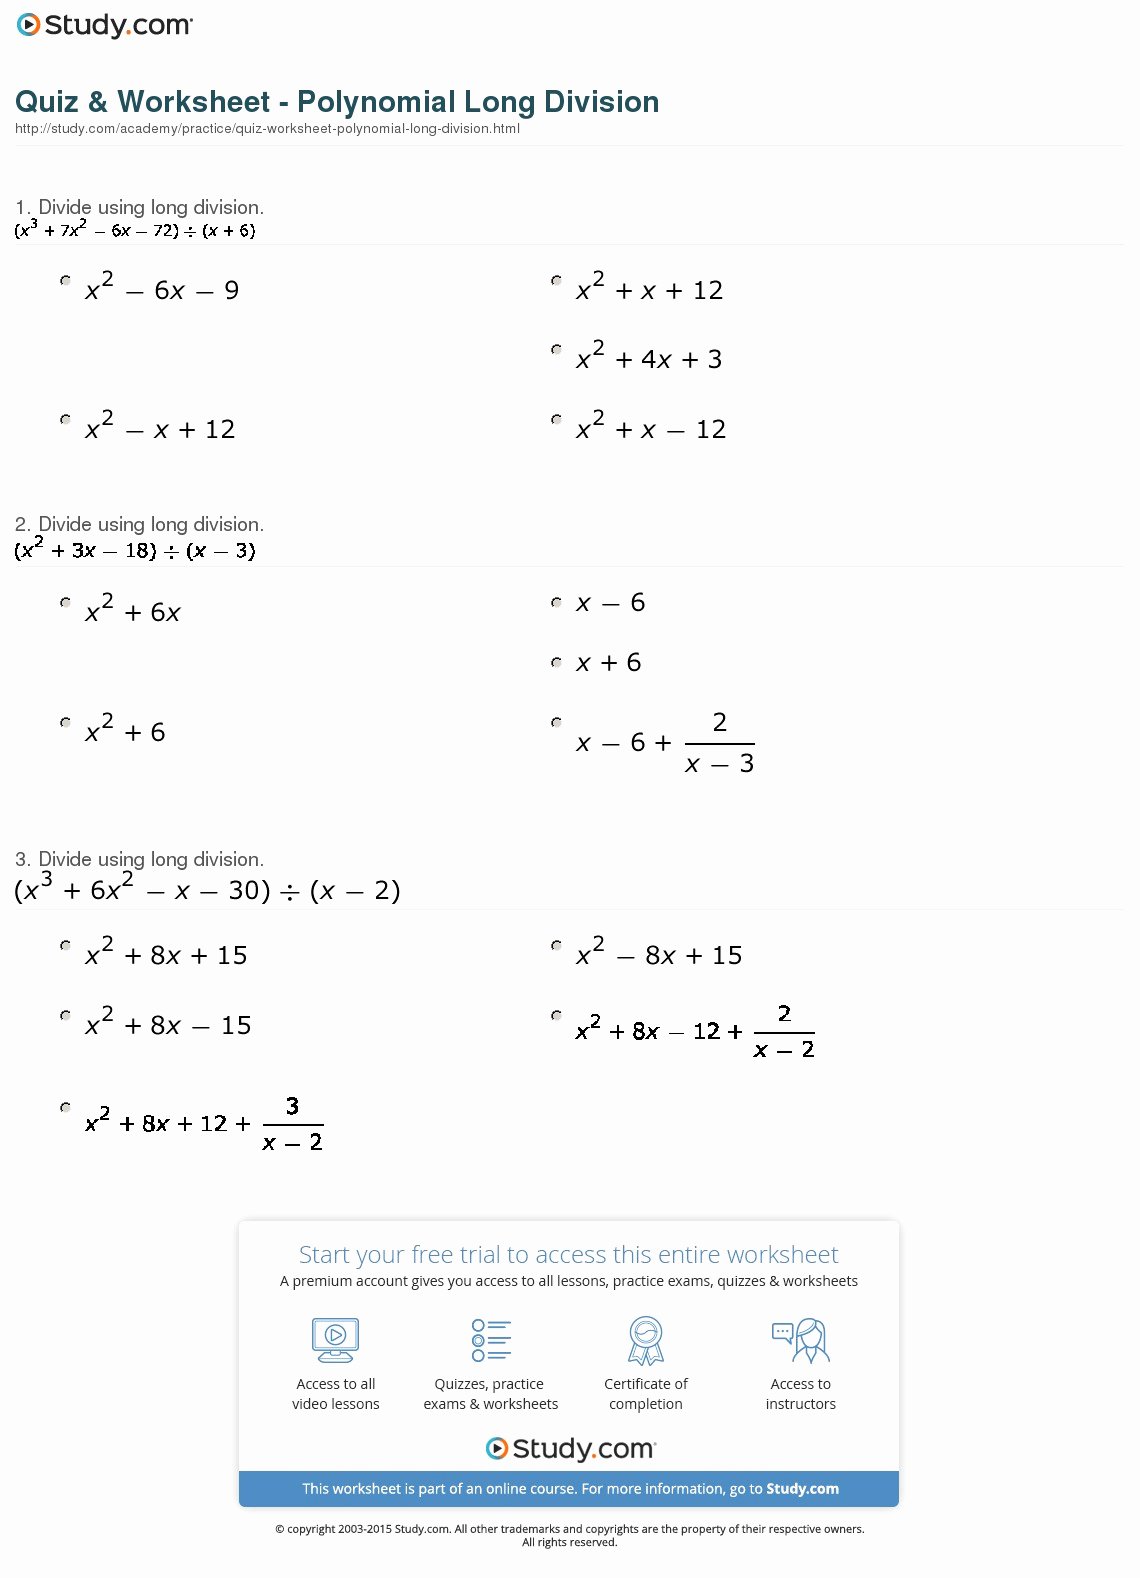 Polynomial Long Division Worksheet Luxury Worksheet Long Division Polynomials